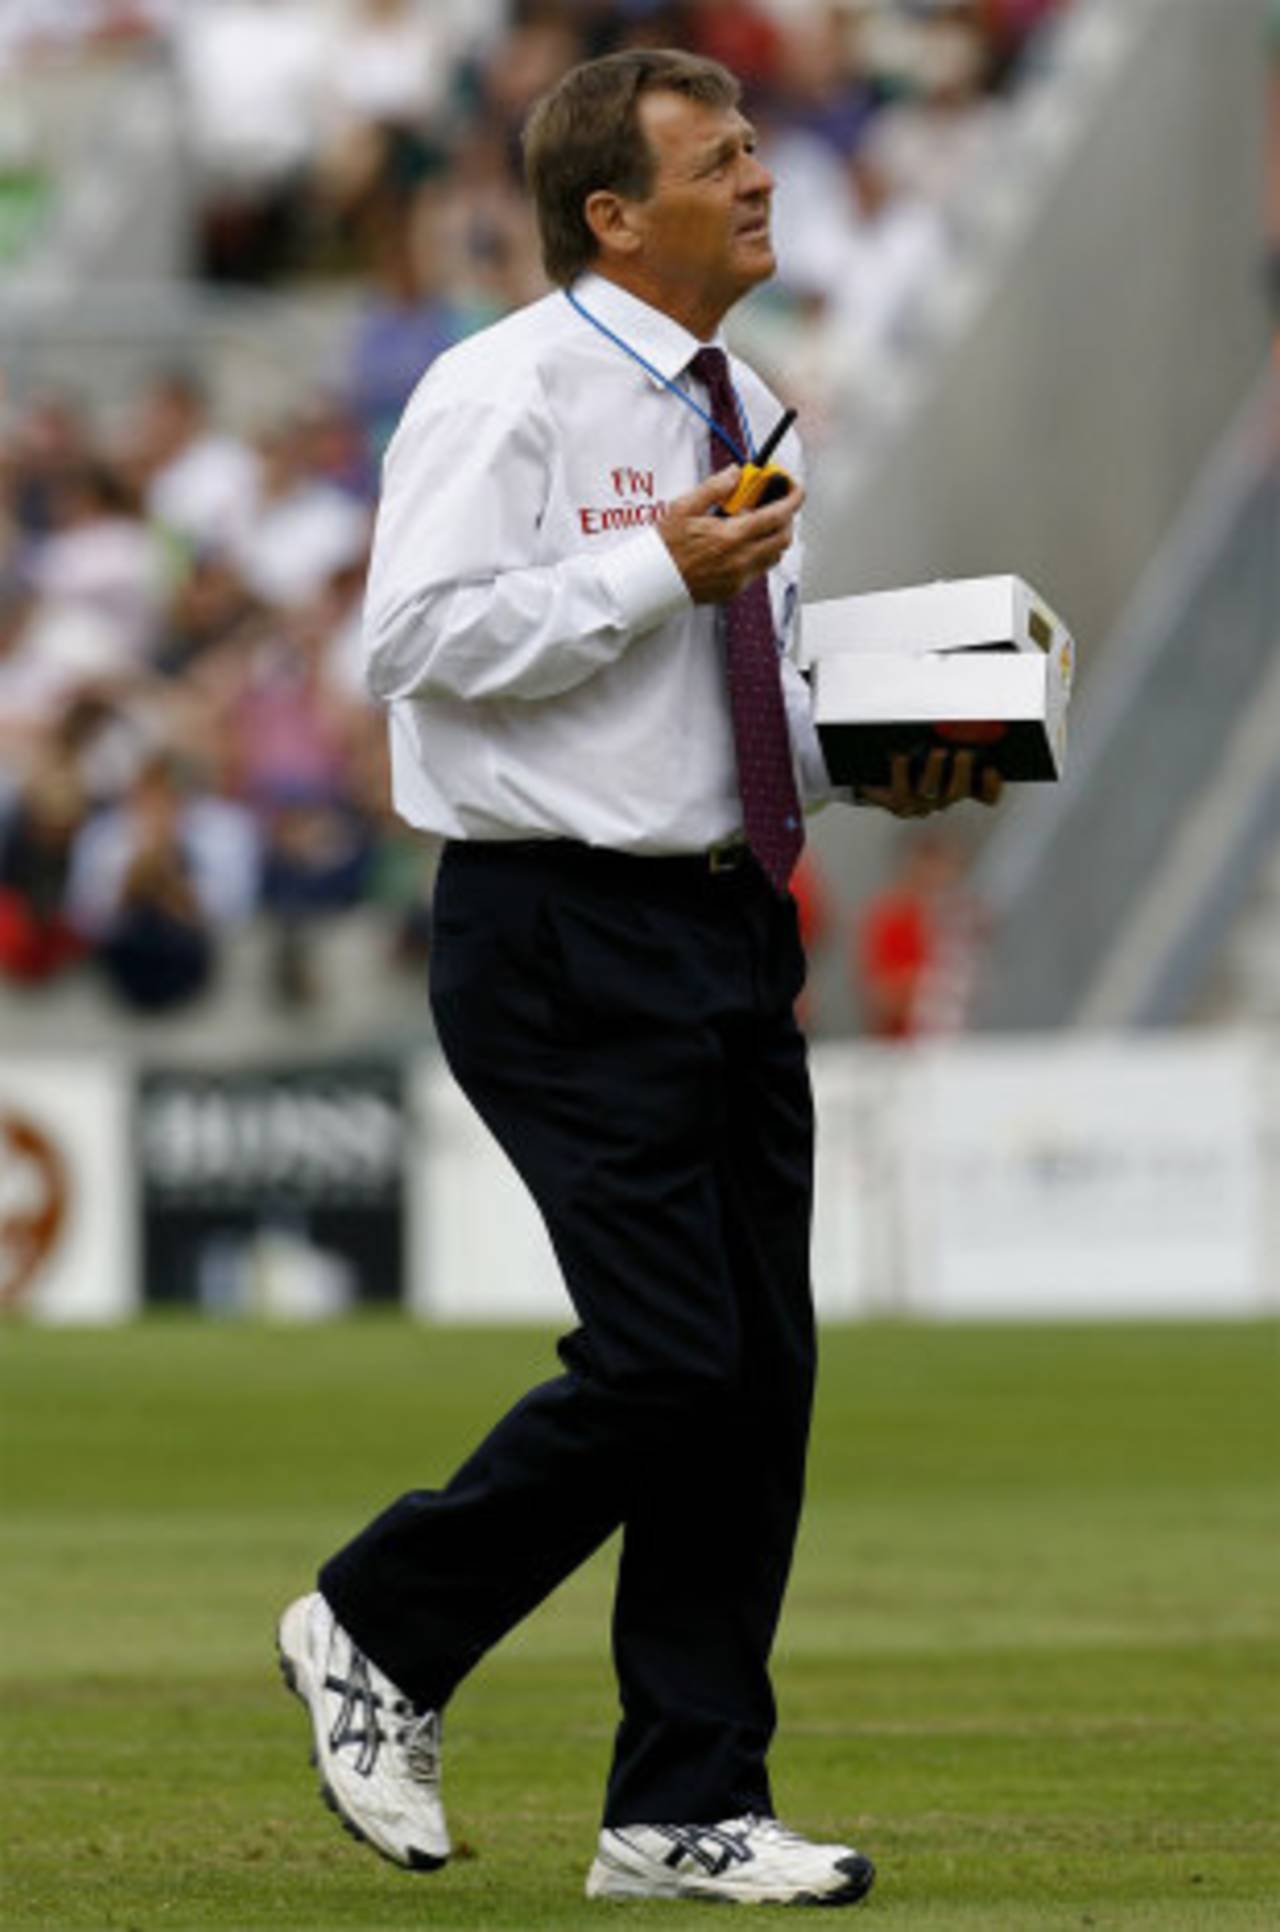 Trevor Jesty called time on his umpiring career in the 2013 English county season&nbsp;&nbsp;&bull;&nbsp;&nbsp;Getty Images